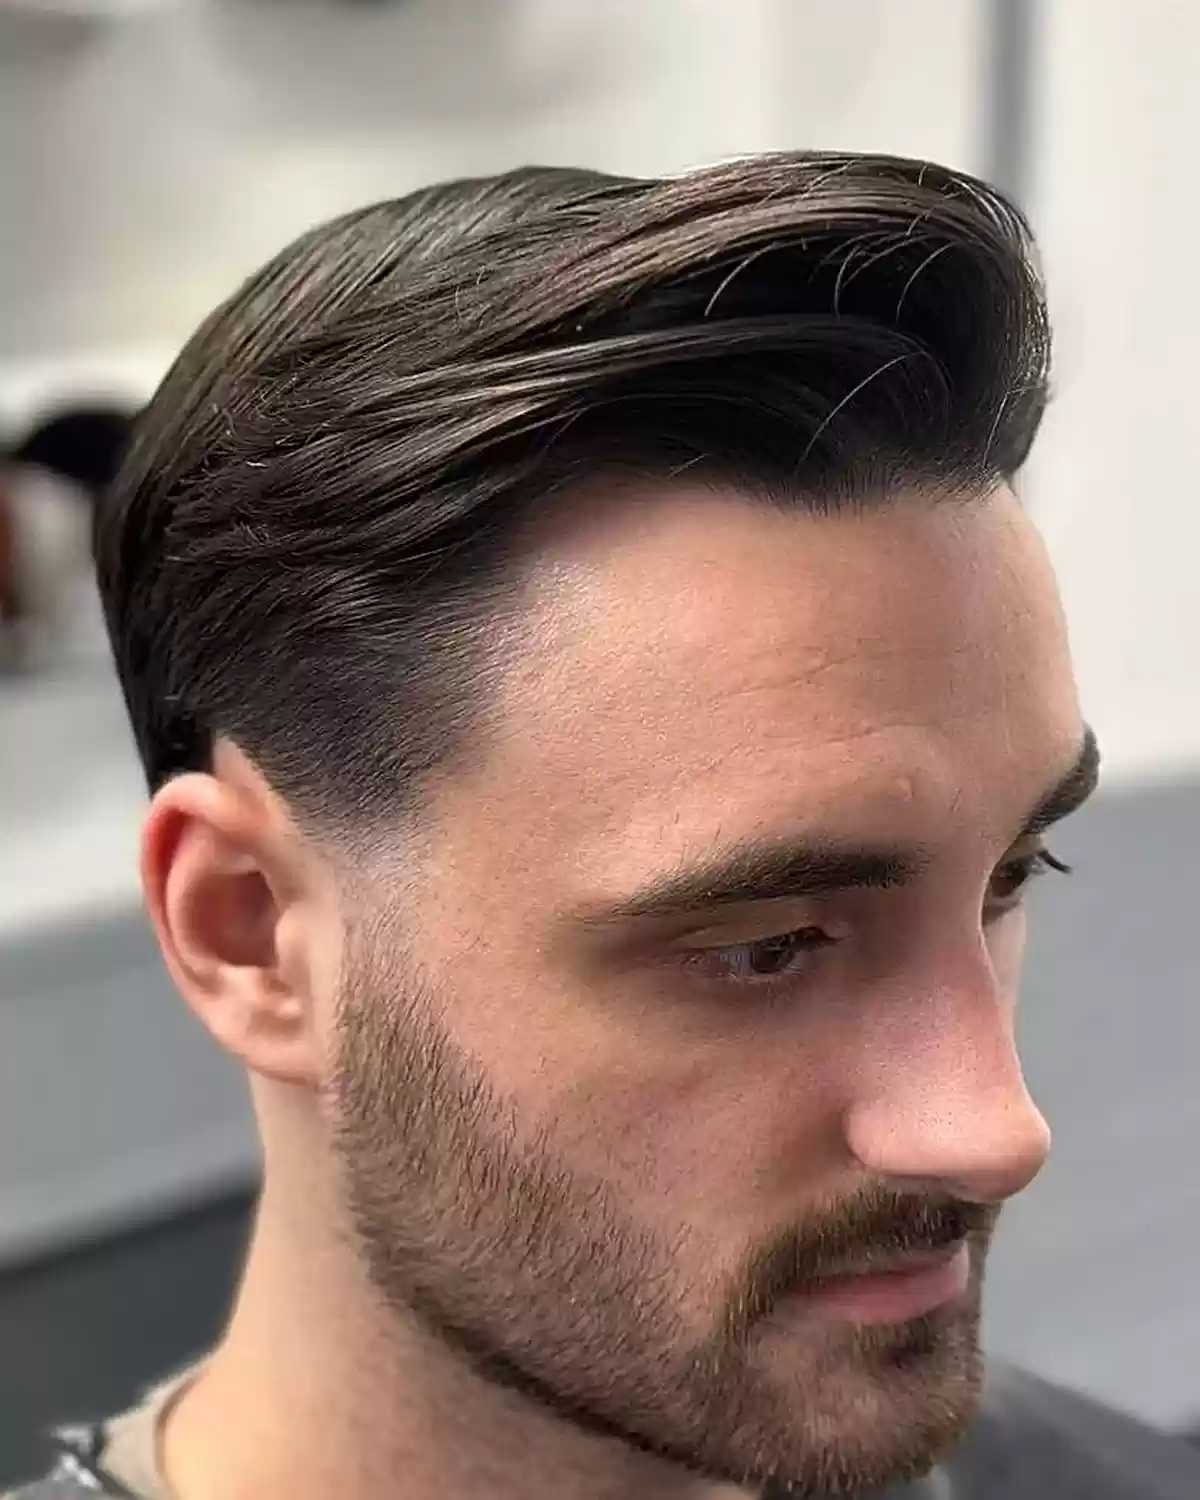 20 Simple Yet Neat Looking Male Cuts for Straight Hair | Haircut Inspiration